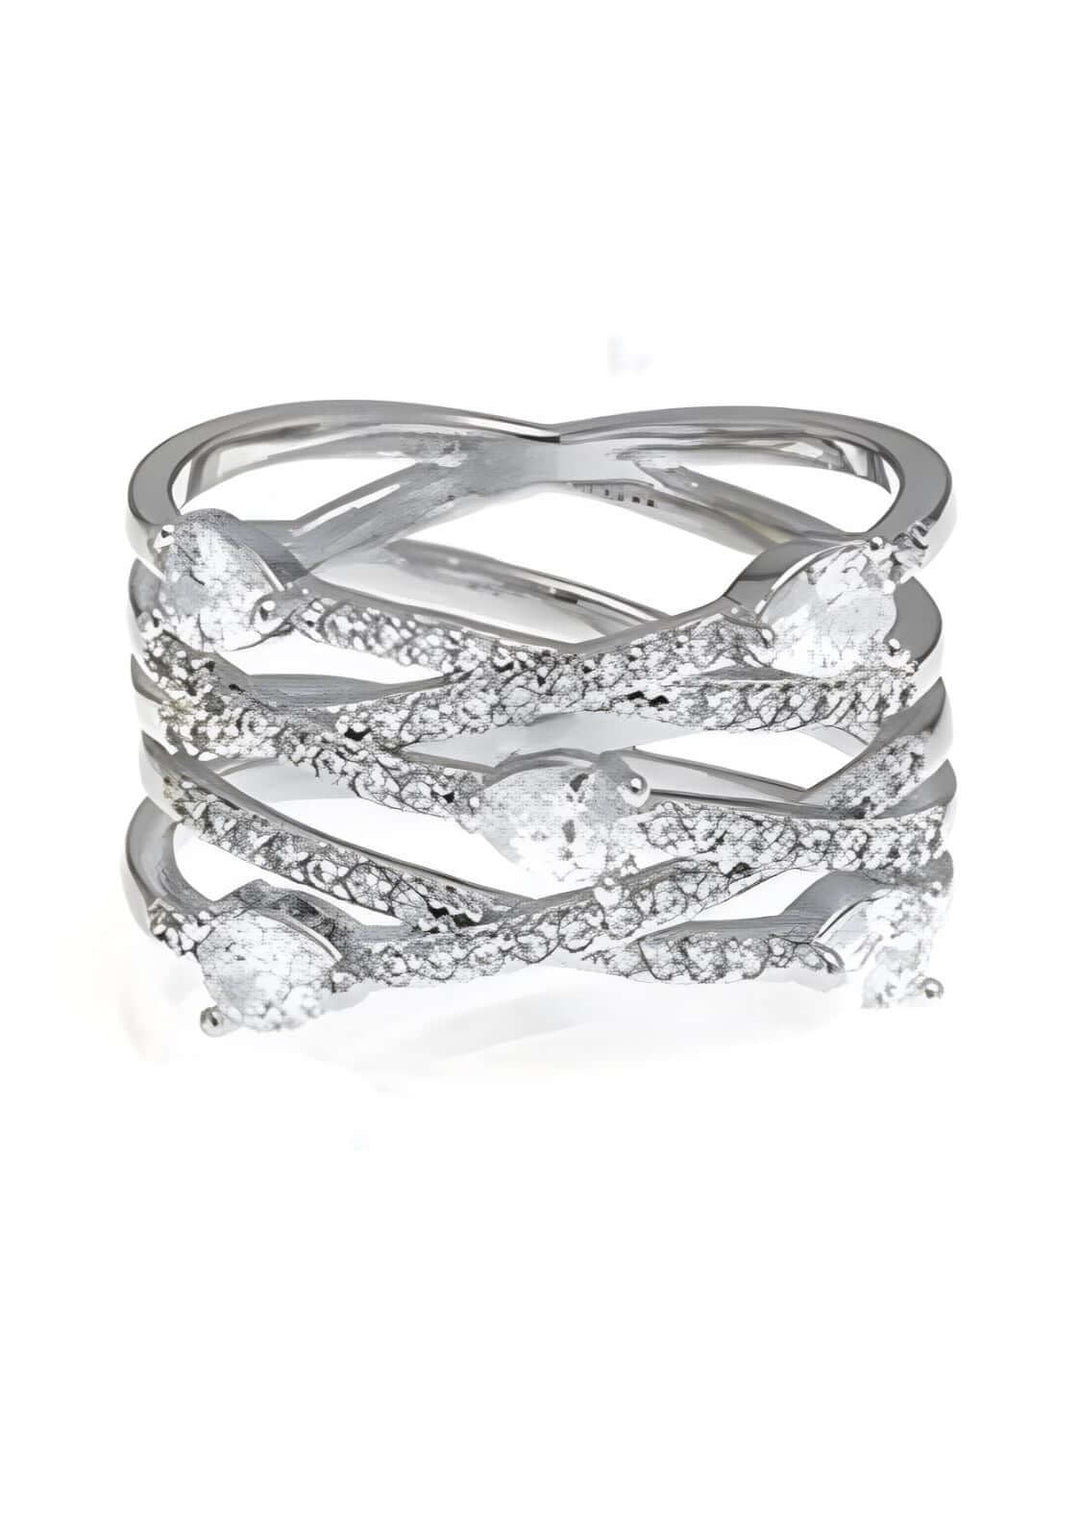 Made in USA, Rhaenyra Ring Women's Fashion Jewelry Ring by Artist Anuja Tolia is made of Silver Plated Stainless Steel, accented with sparkling cubic zirconia stones